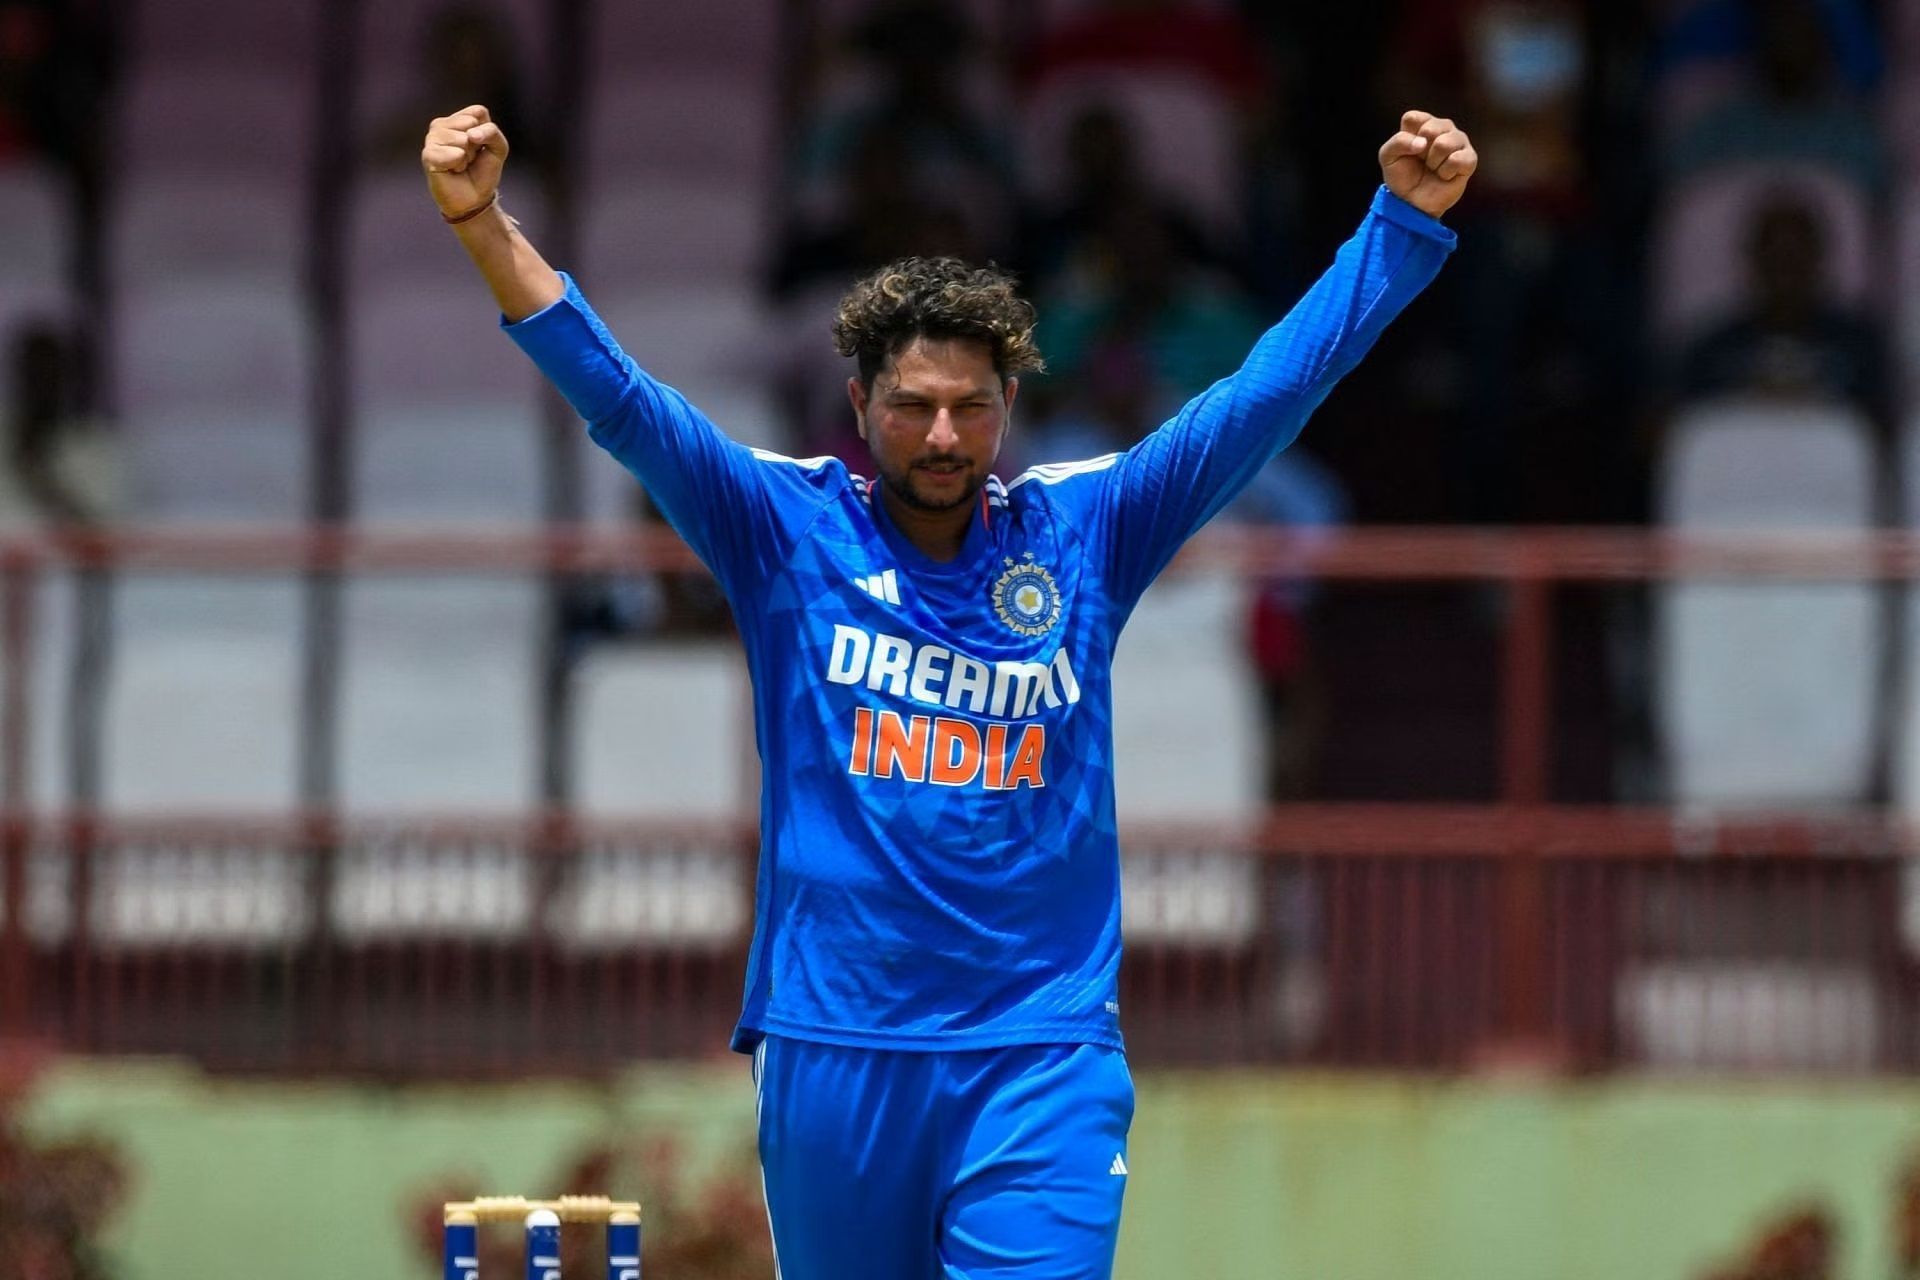 Kuldeep Yadav bowled a penetrative spell in the third T20I against the West Indies.